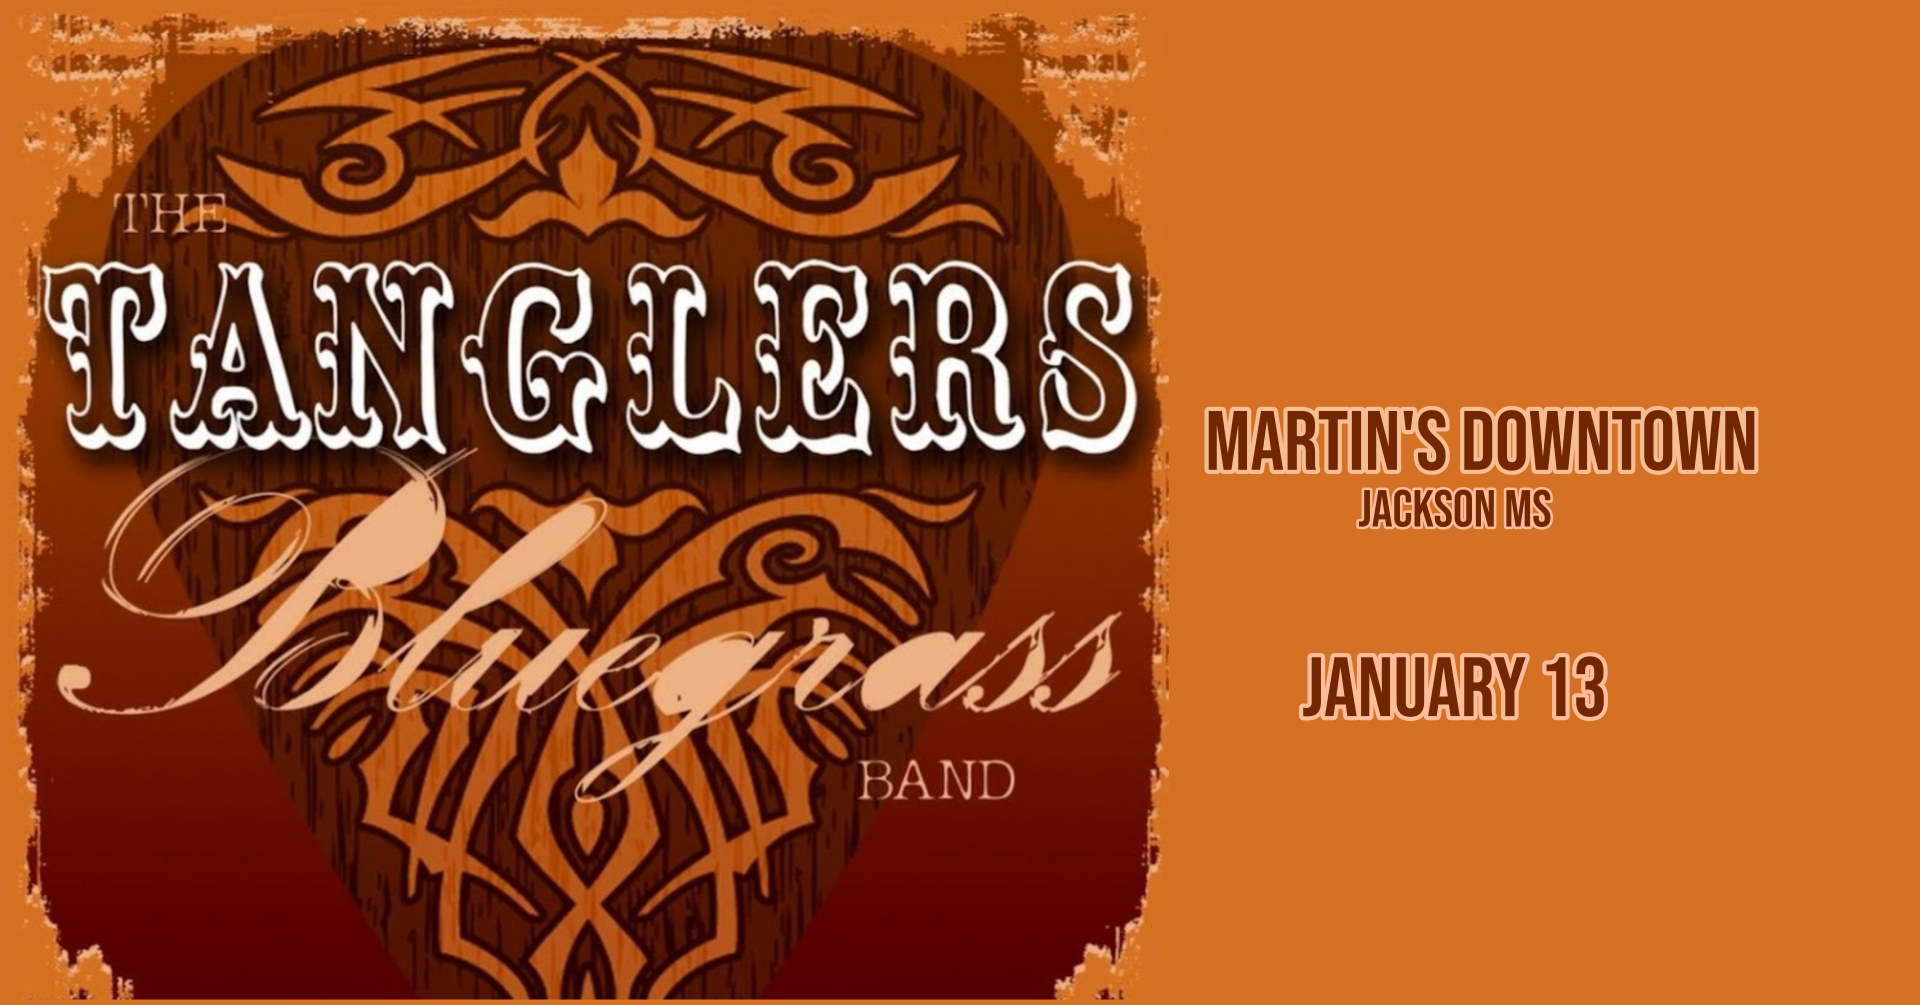 The Tanglers’ Live at Martin’s Downtown